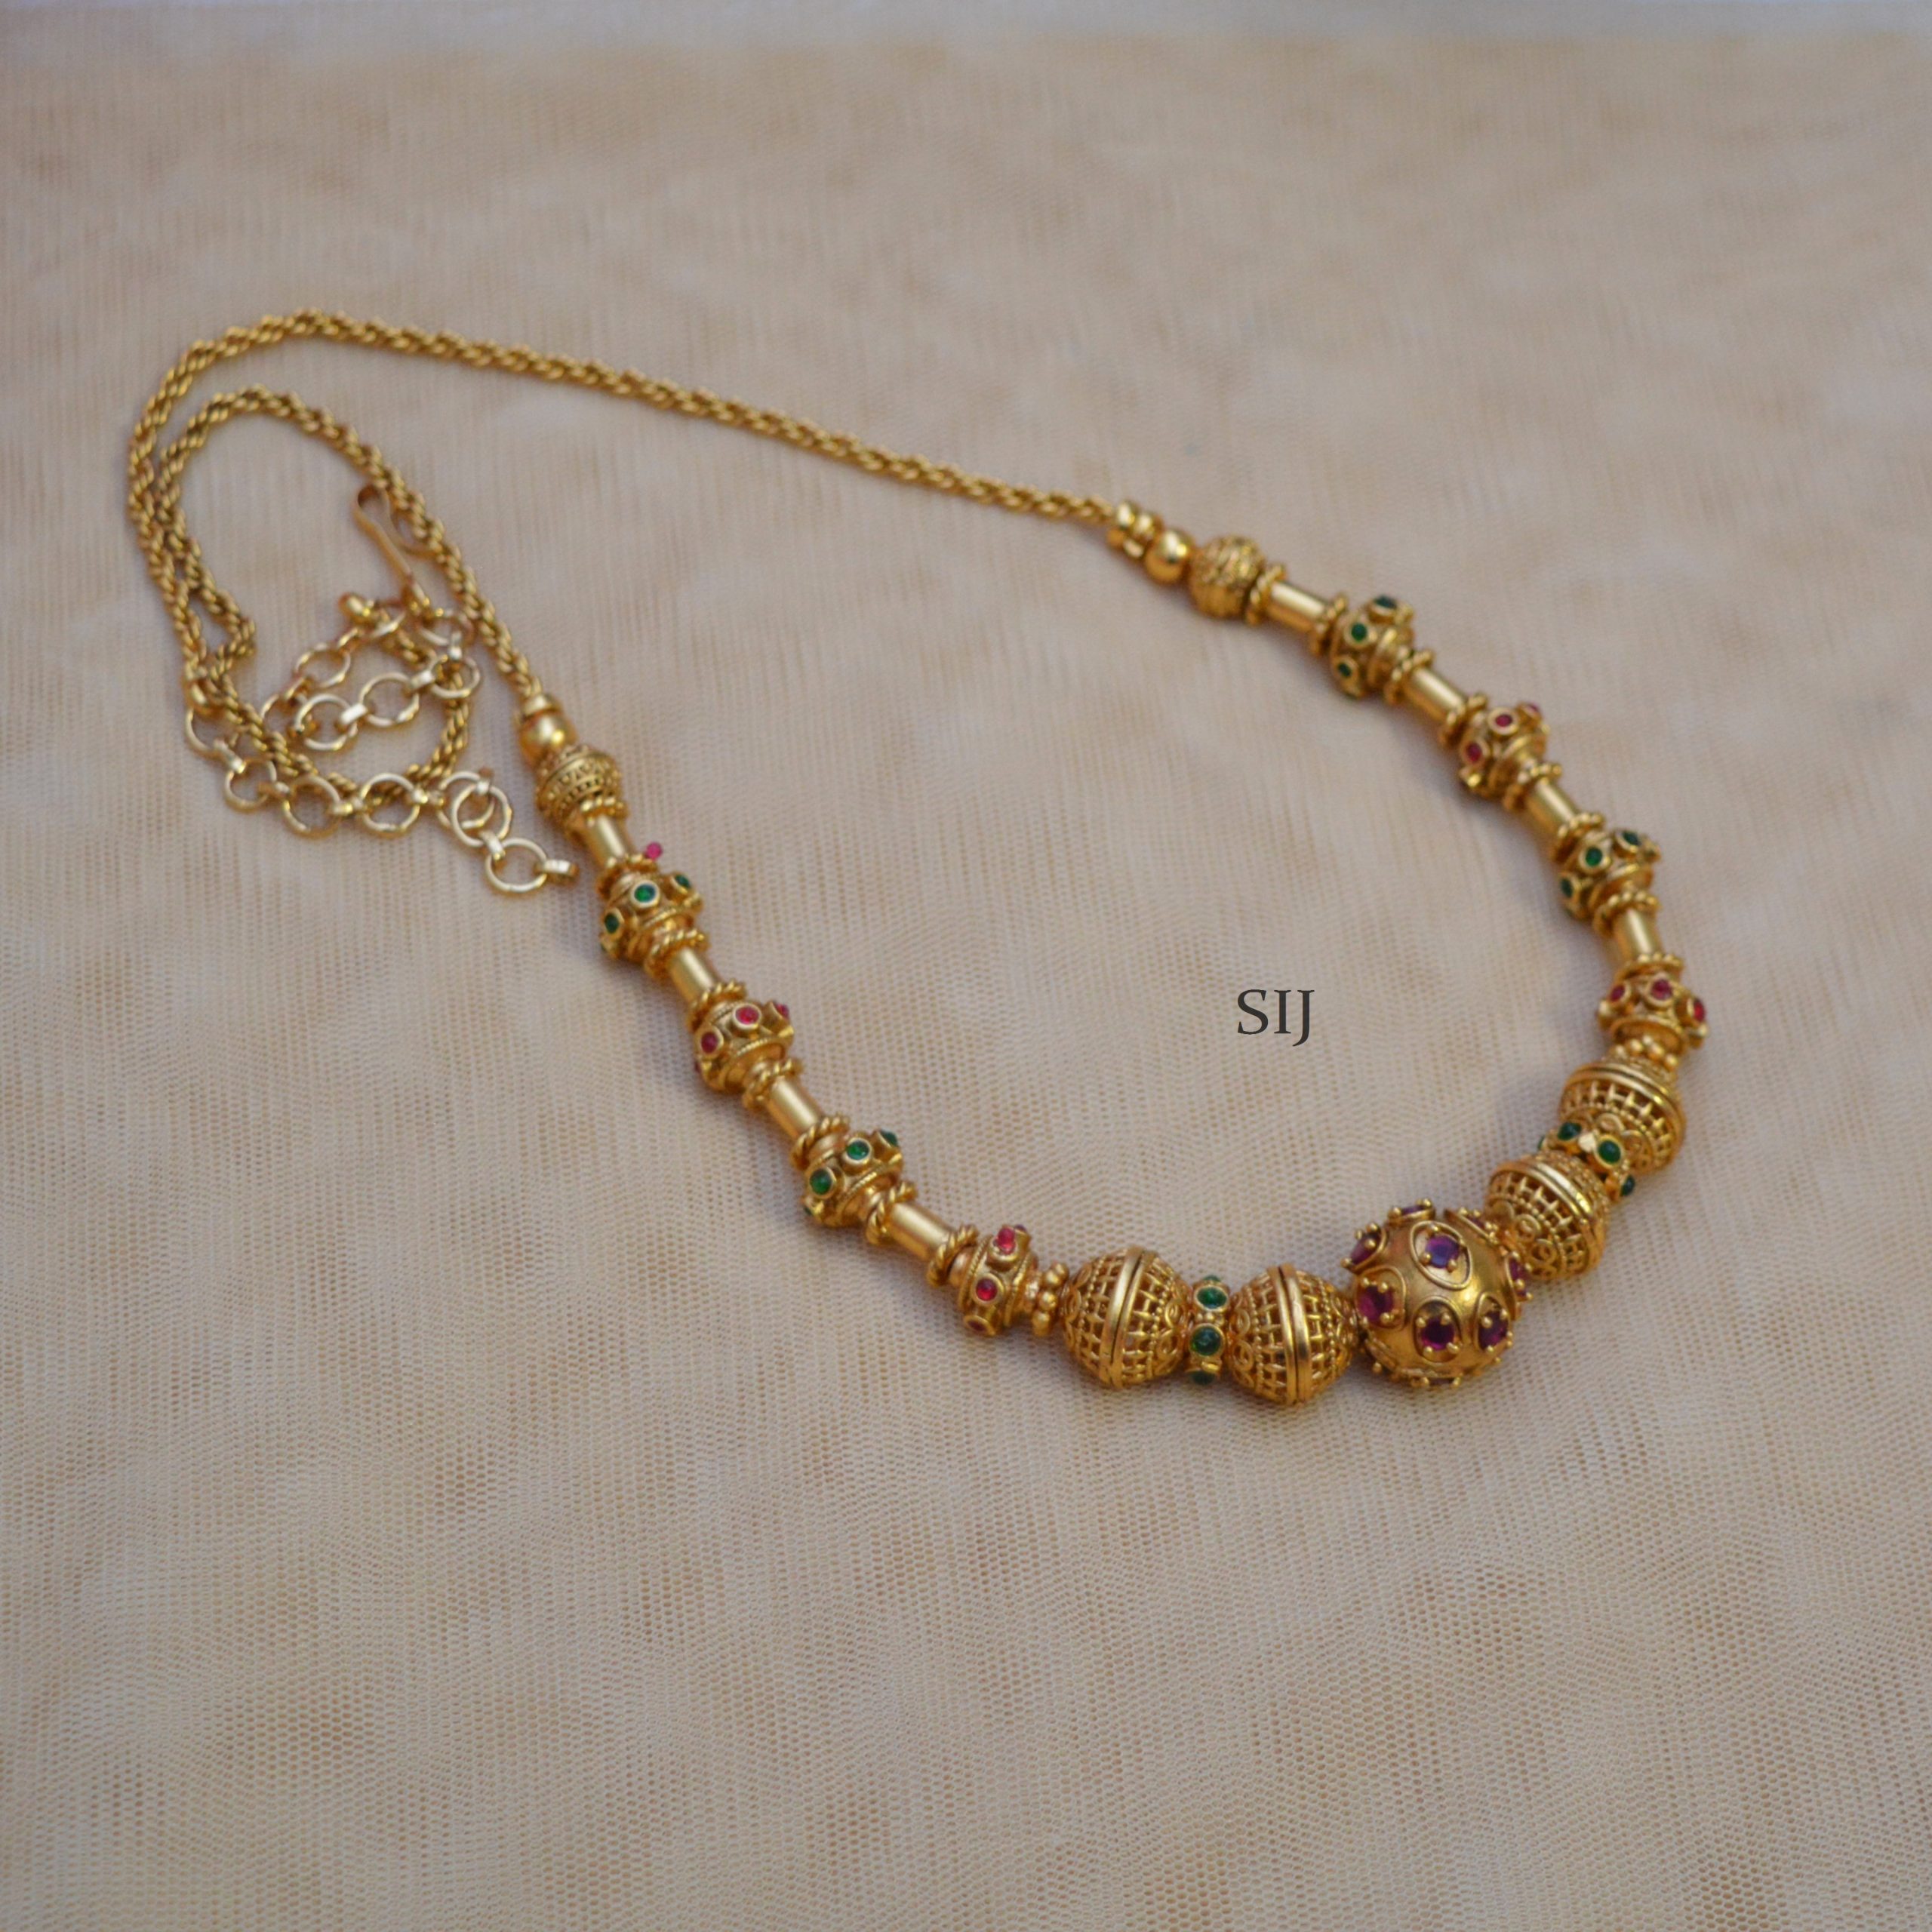 Antique Ball Chain - South India Jewels